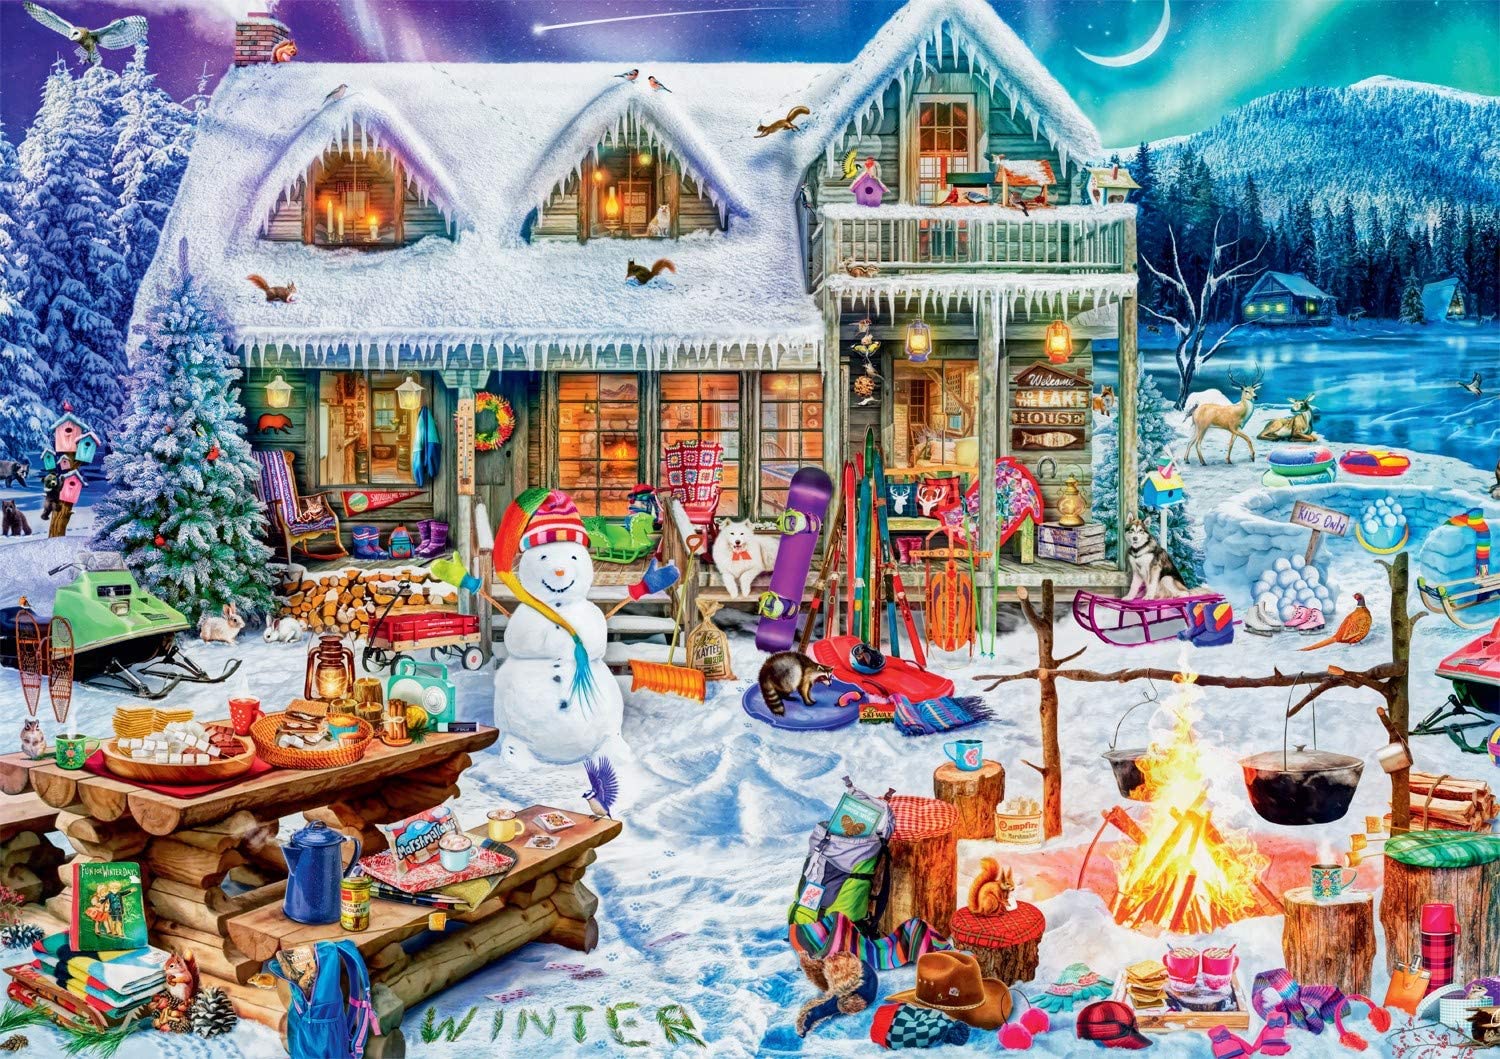 White Swan Cottage Cabin & Cottage Jigsaw Puzzle By Eurographics